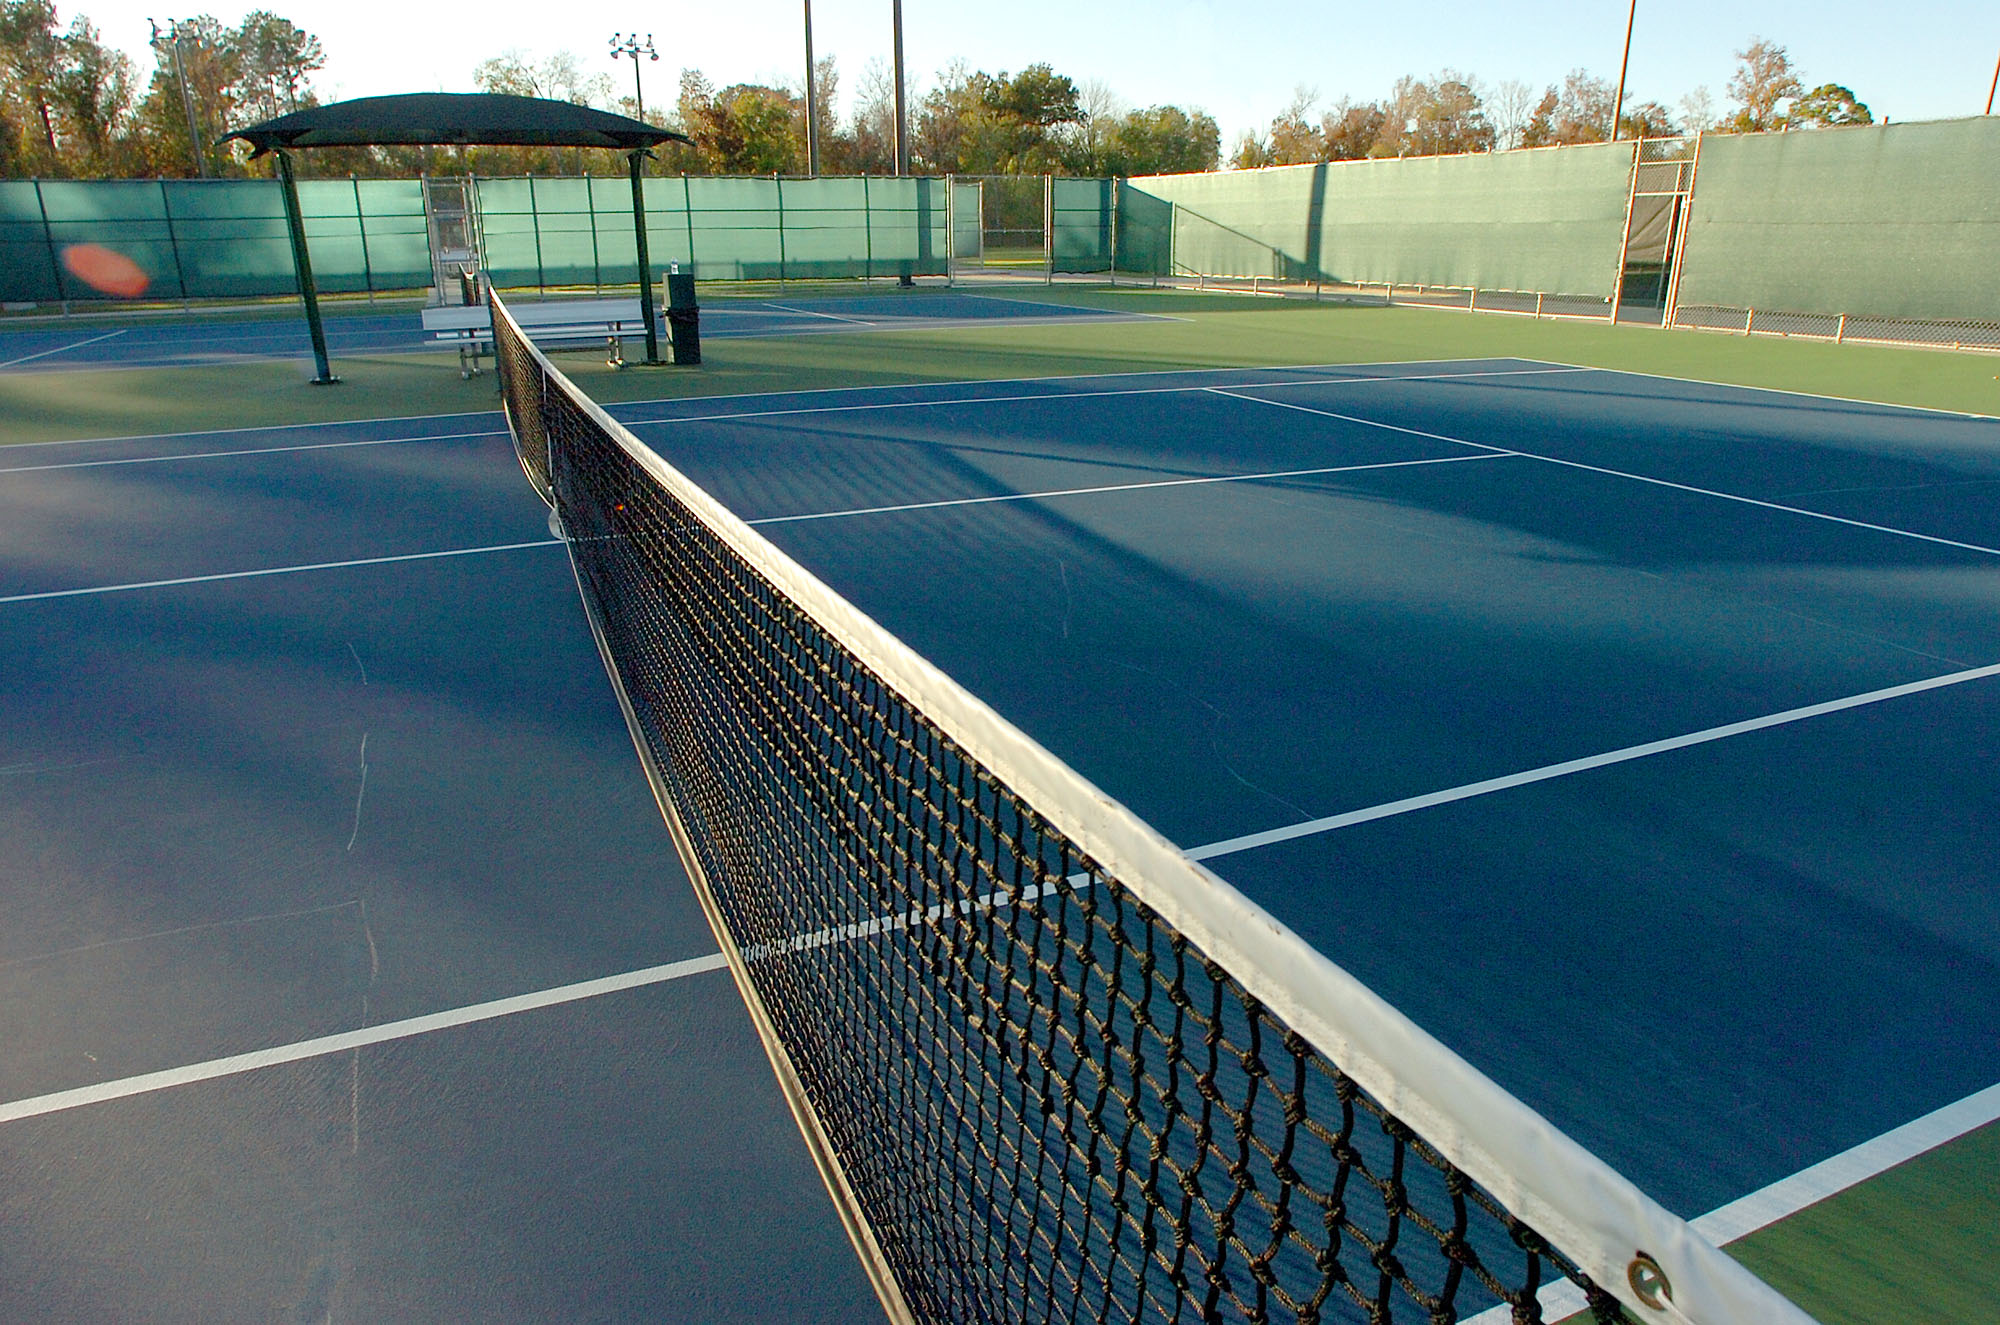 Beaumont tennis center could be named after late community member